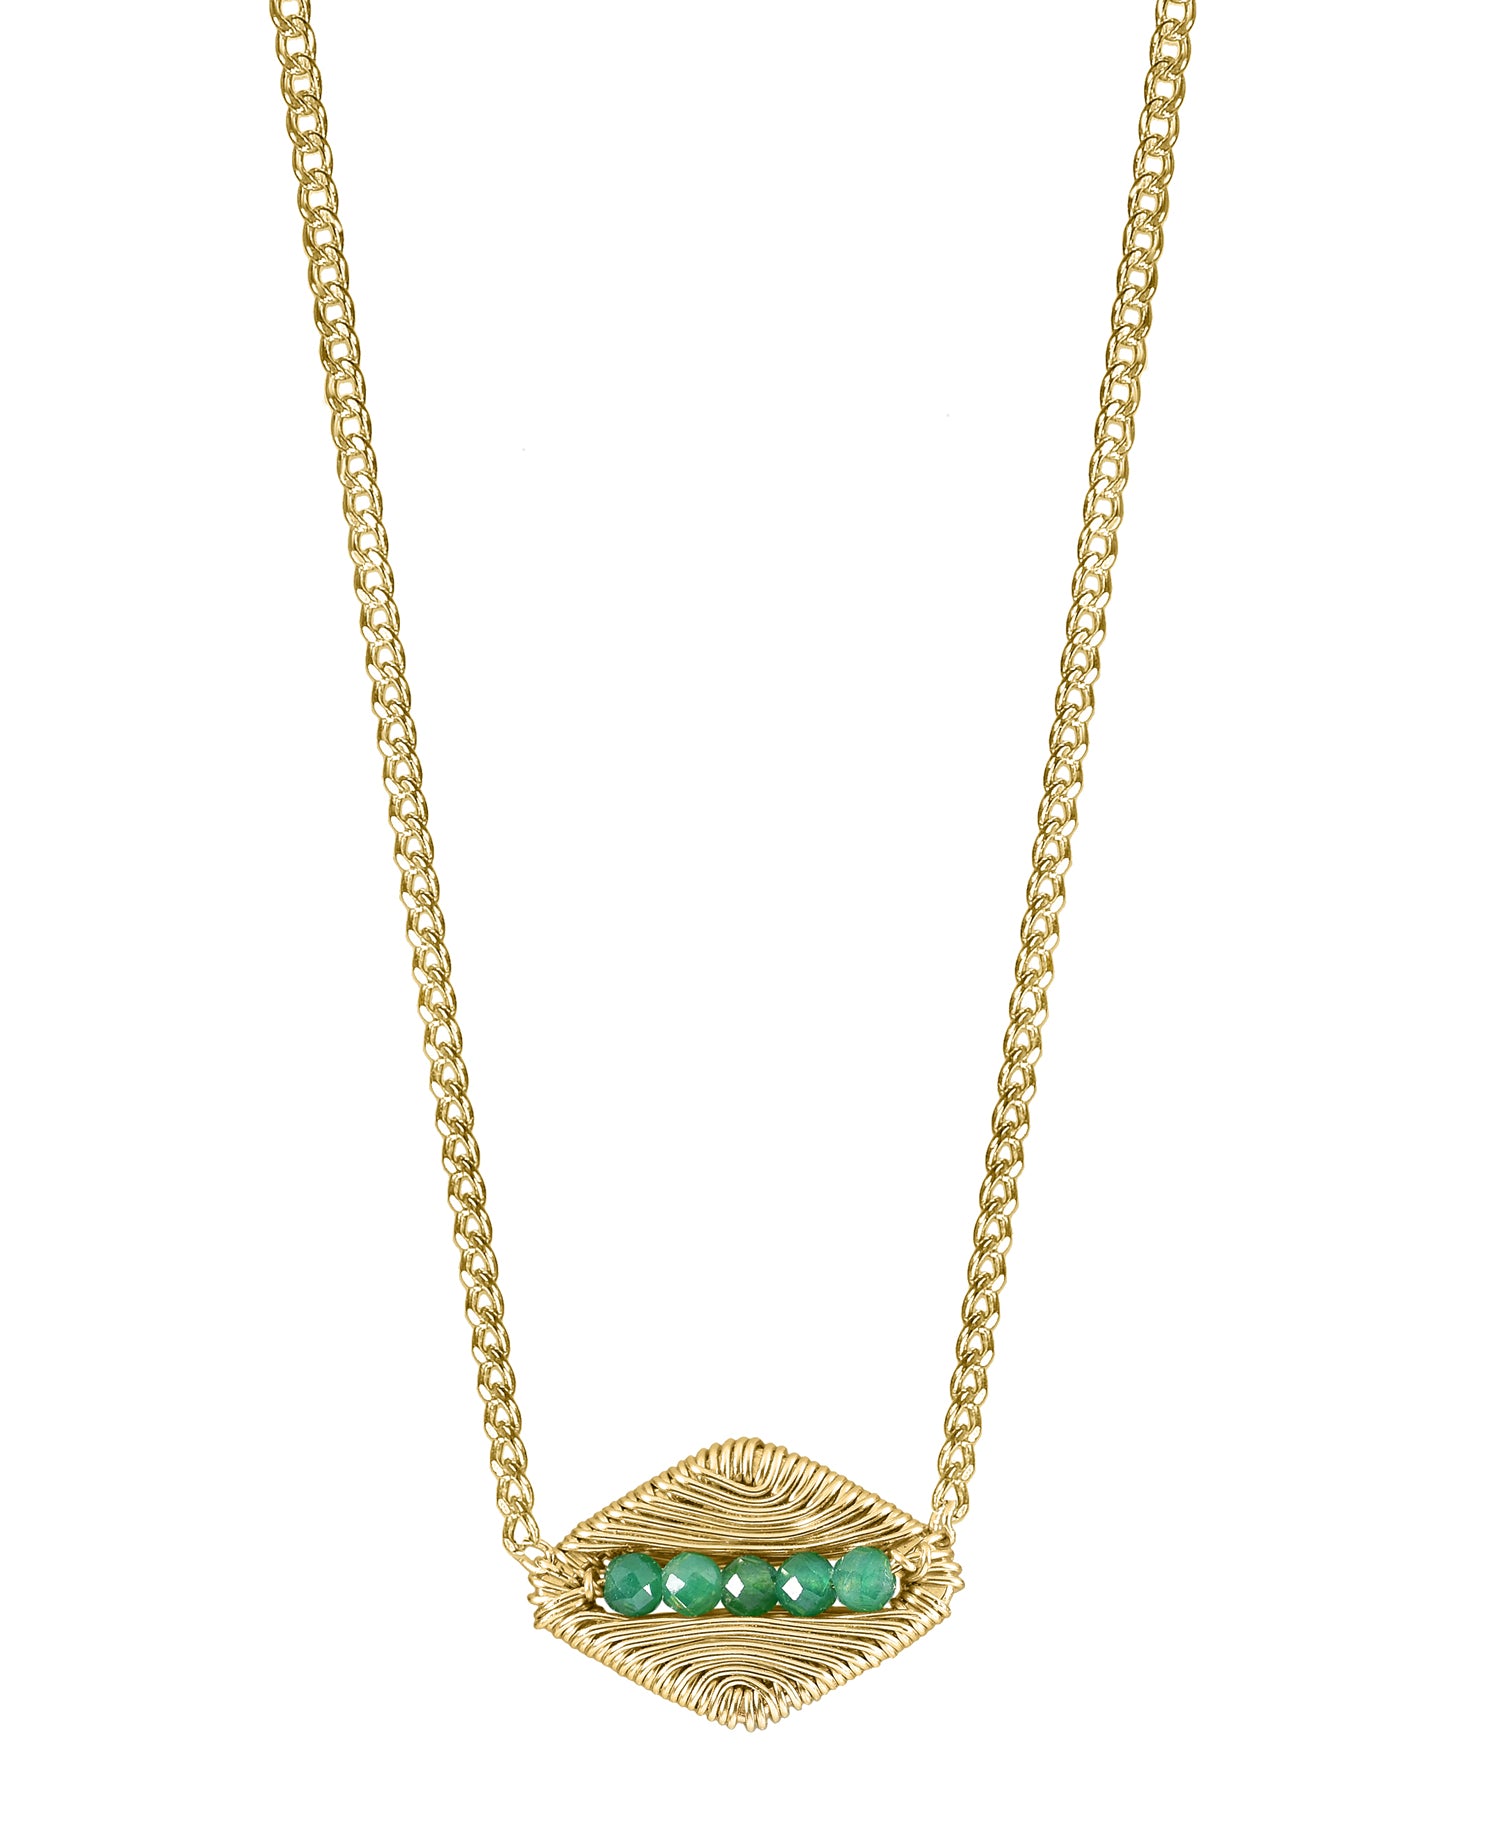 Emerald 14k gold fill Necklace measures 16" in length Pendant measures 3/8" in length and 1/2" in width Handmade in our Los Angeles studio